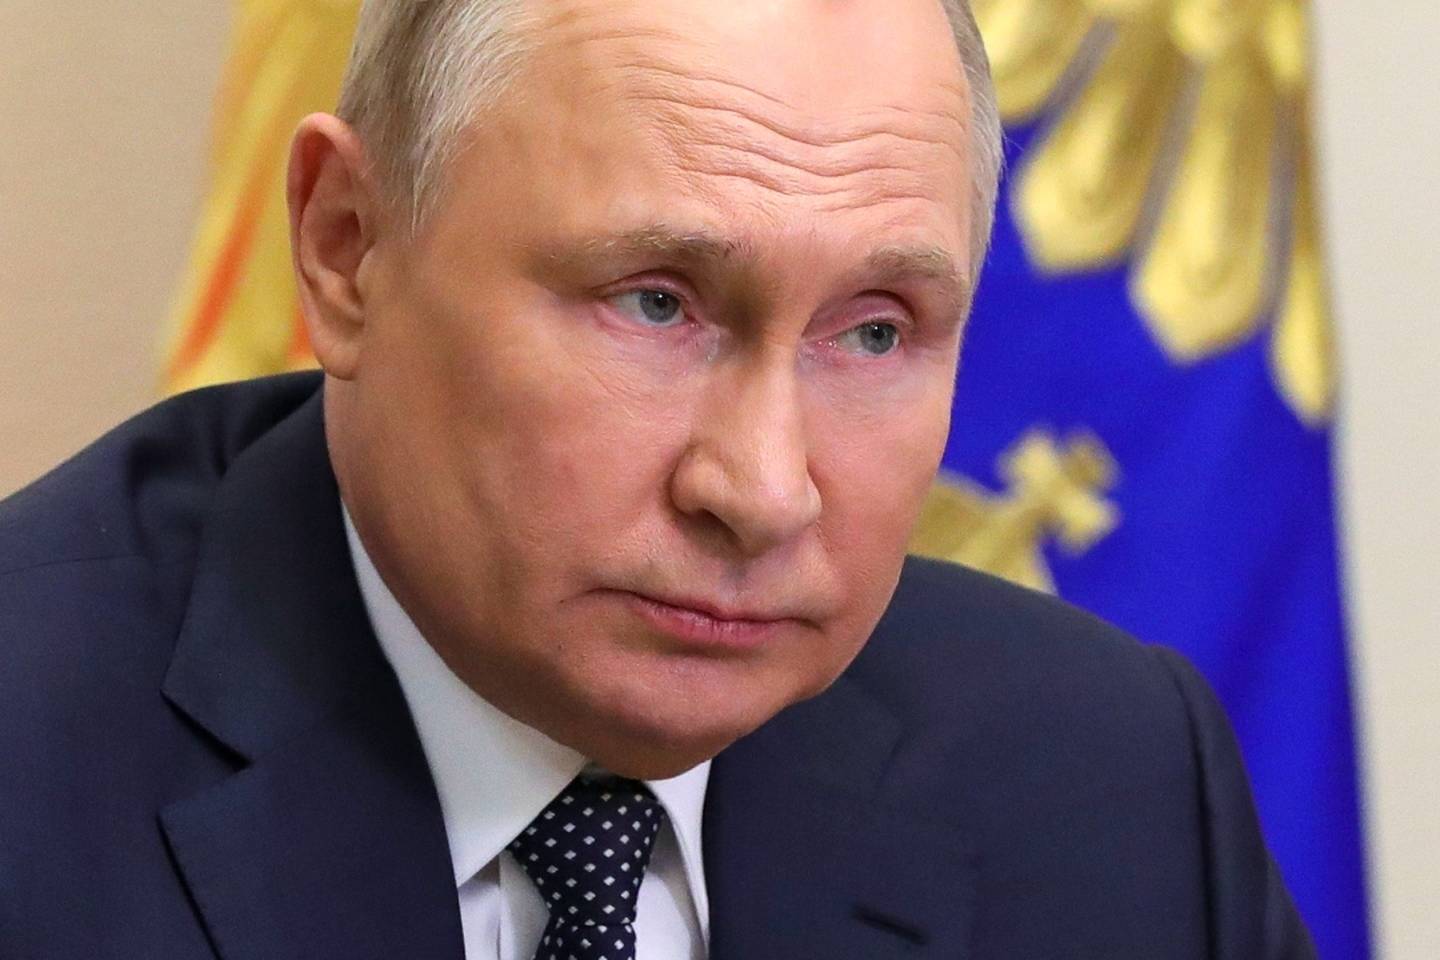 Putin: Russia will cut off gas to western countries that do not pay in rubles